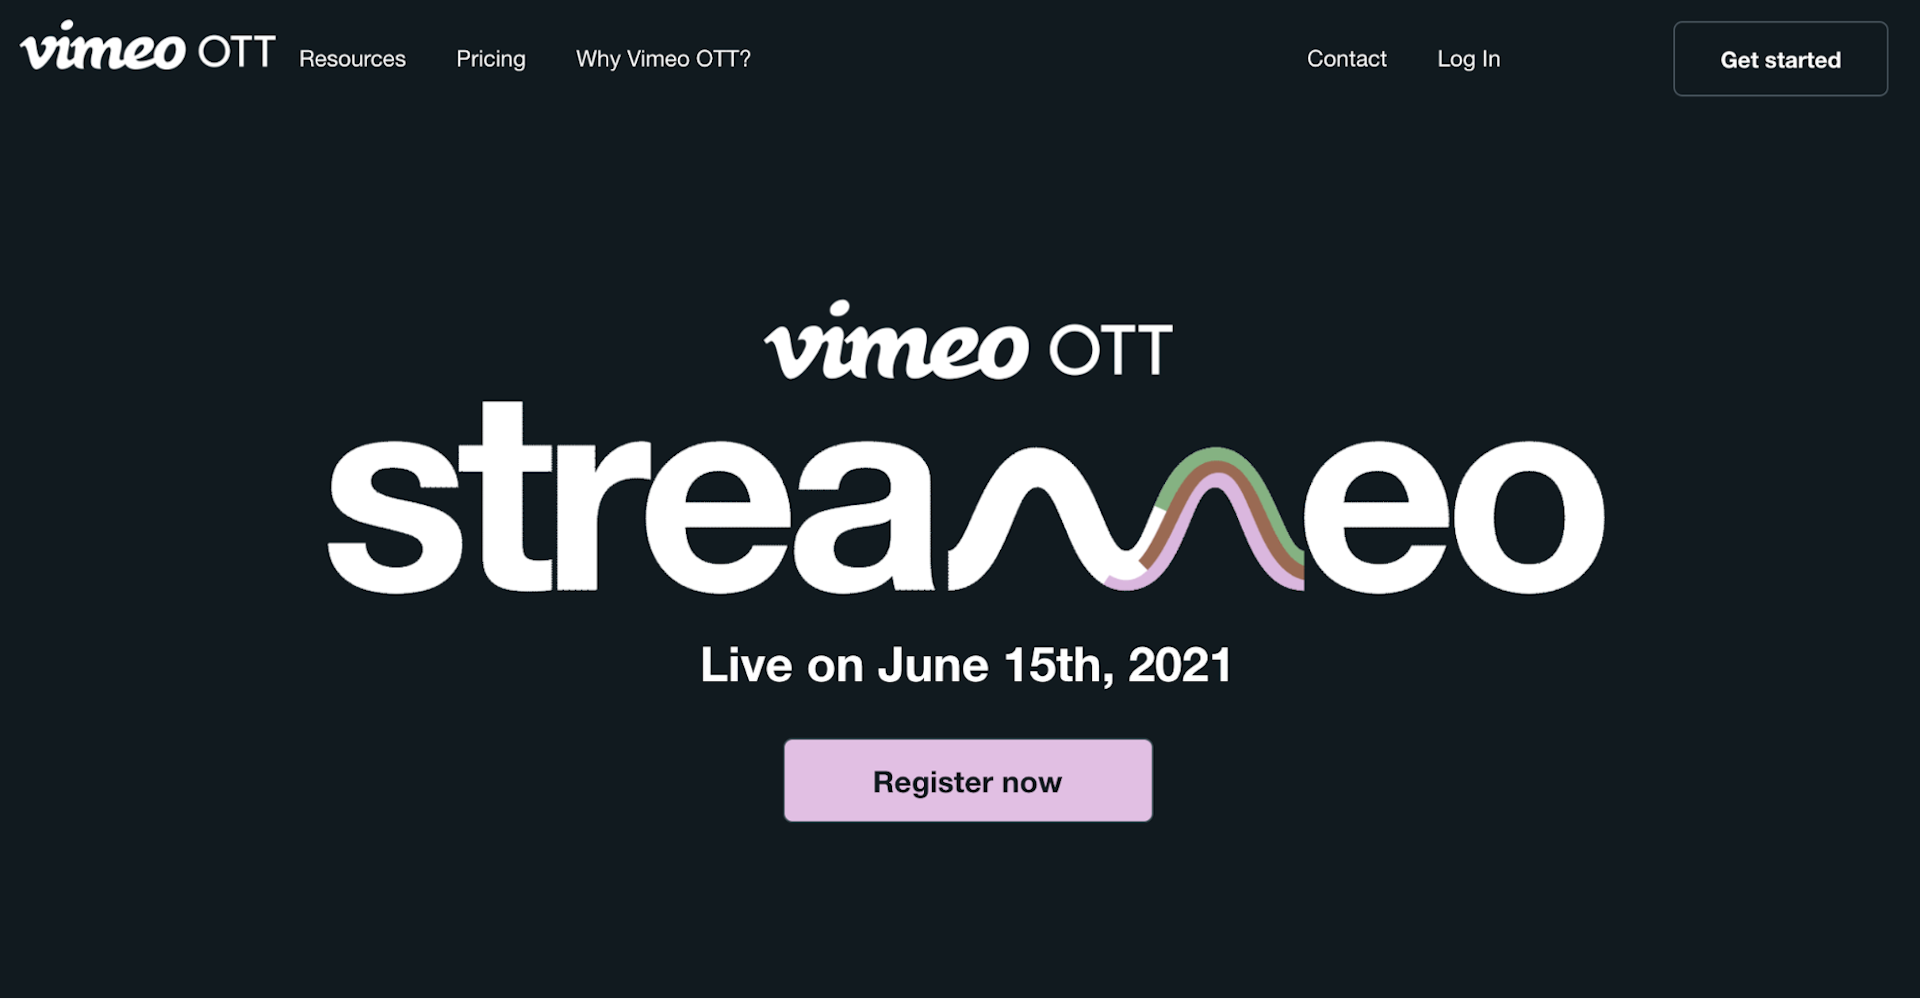 Example of video marketing with Vimeo's Streameo event